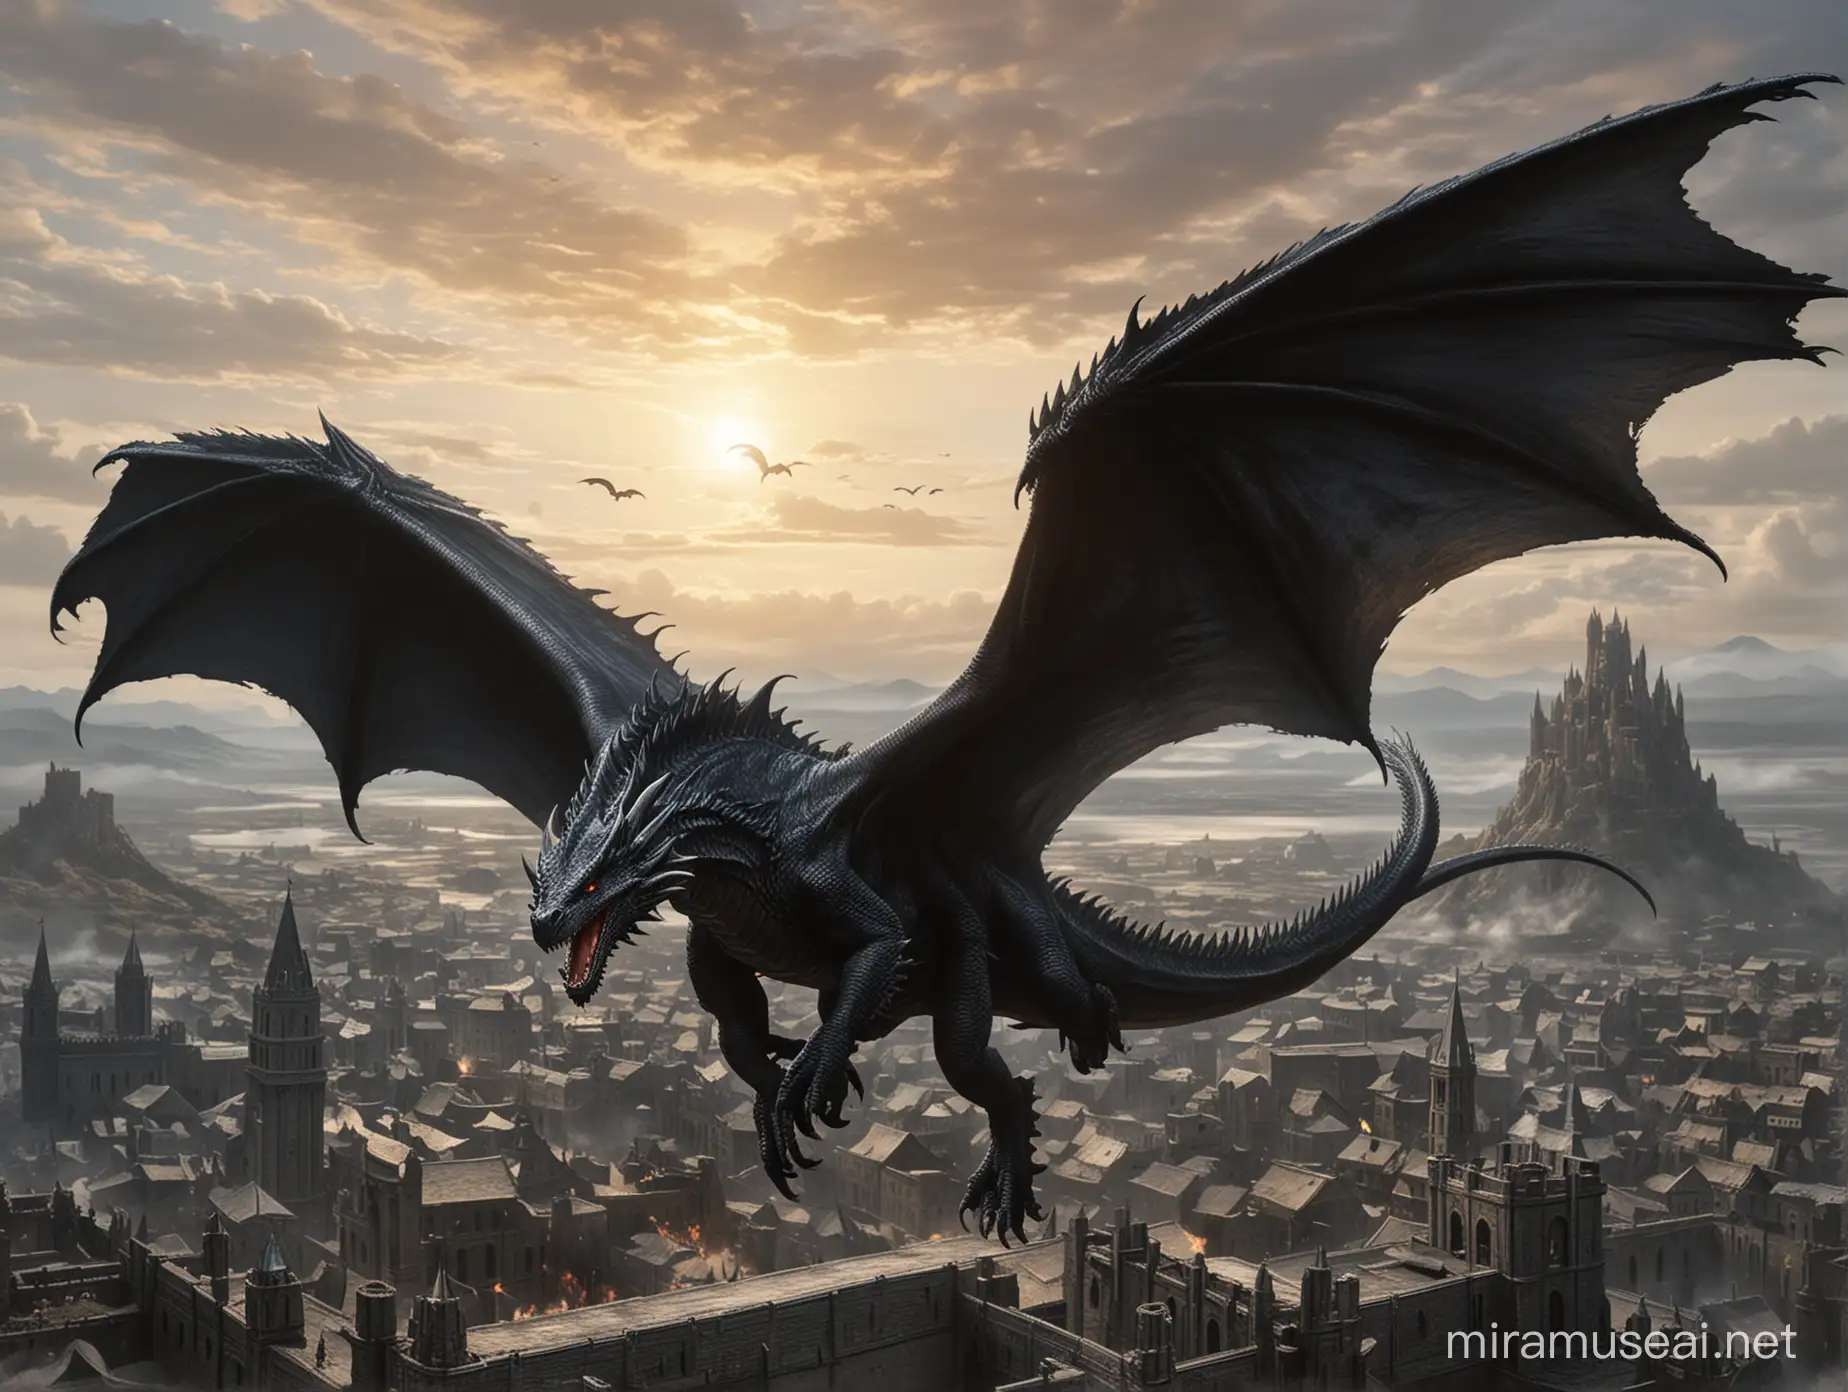 Balerion the Black Wrath Majestic Giant Dragon Soaring Above a Medieval Town